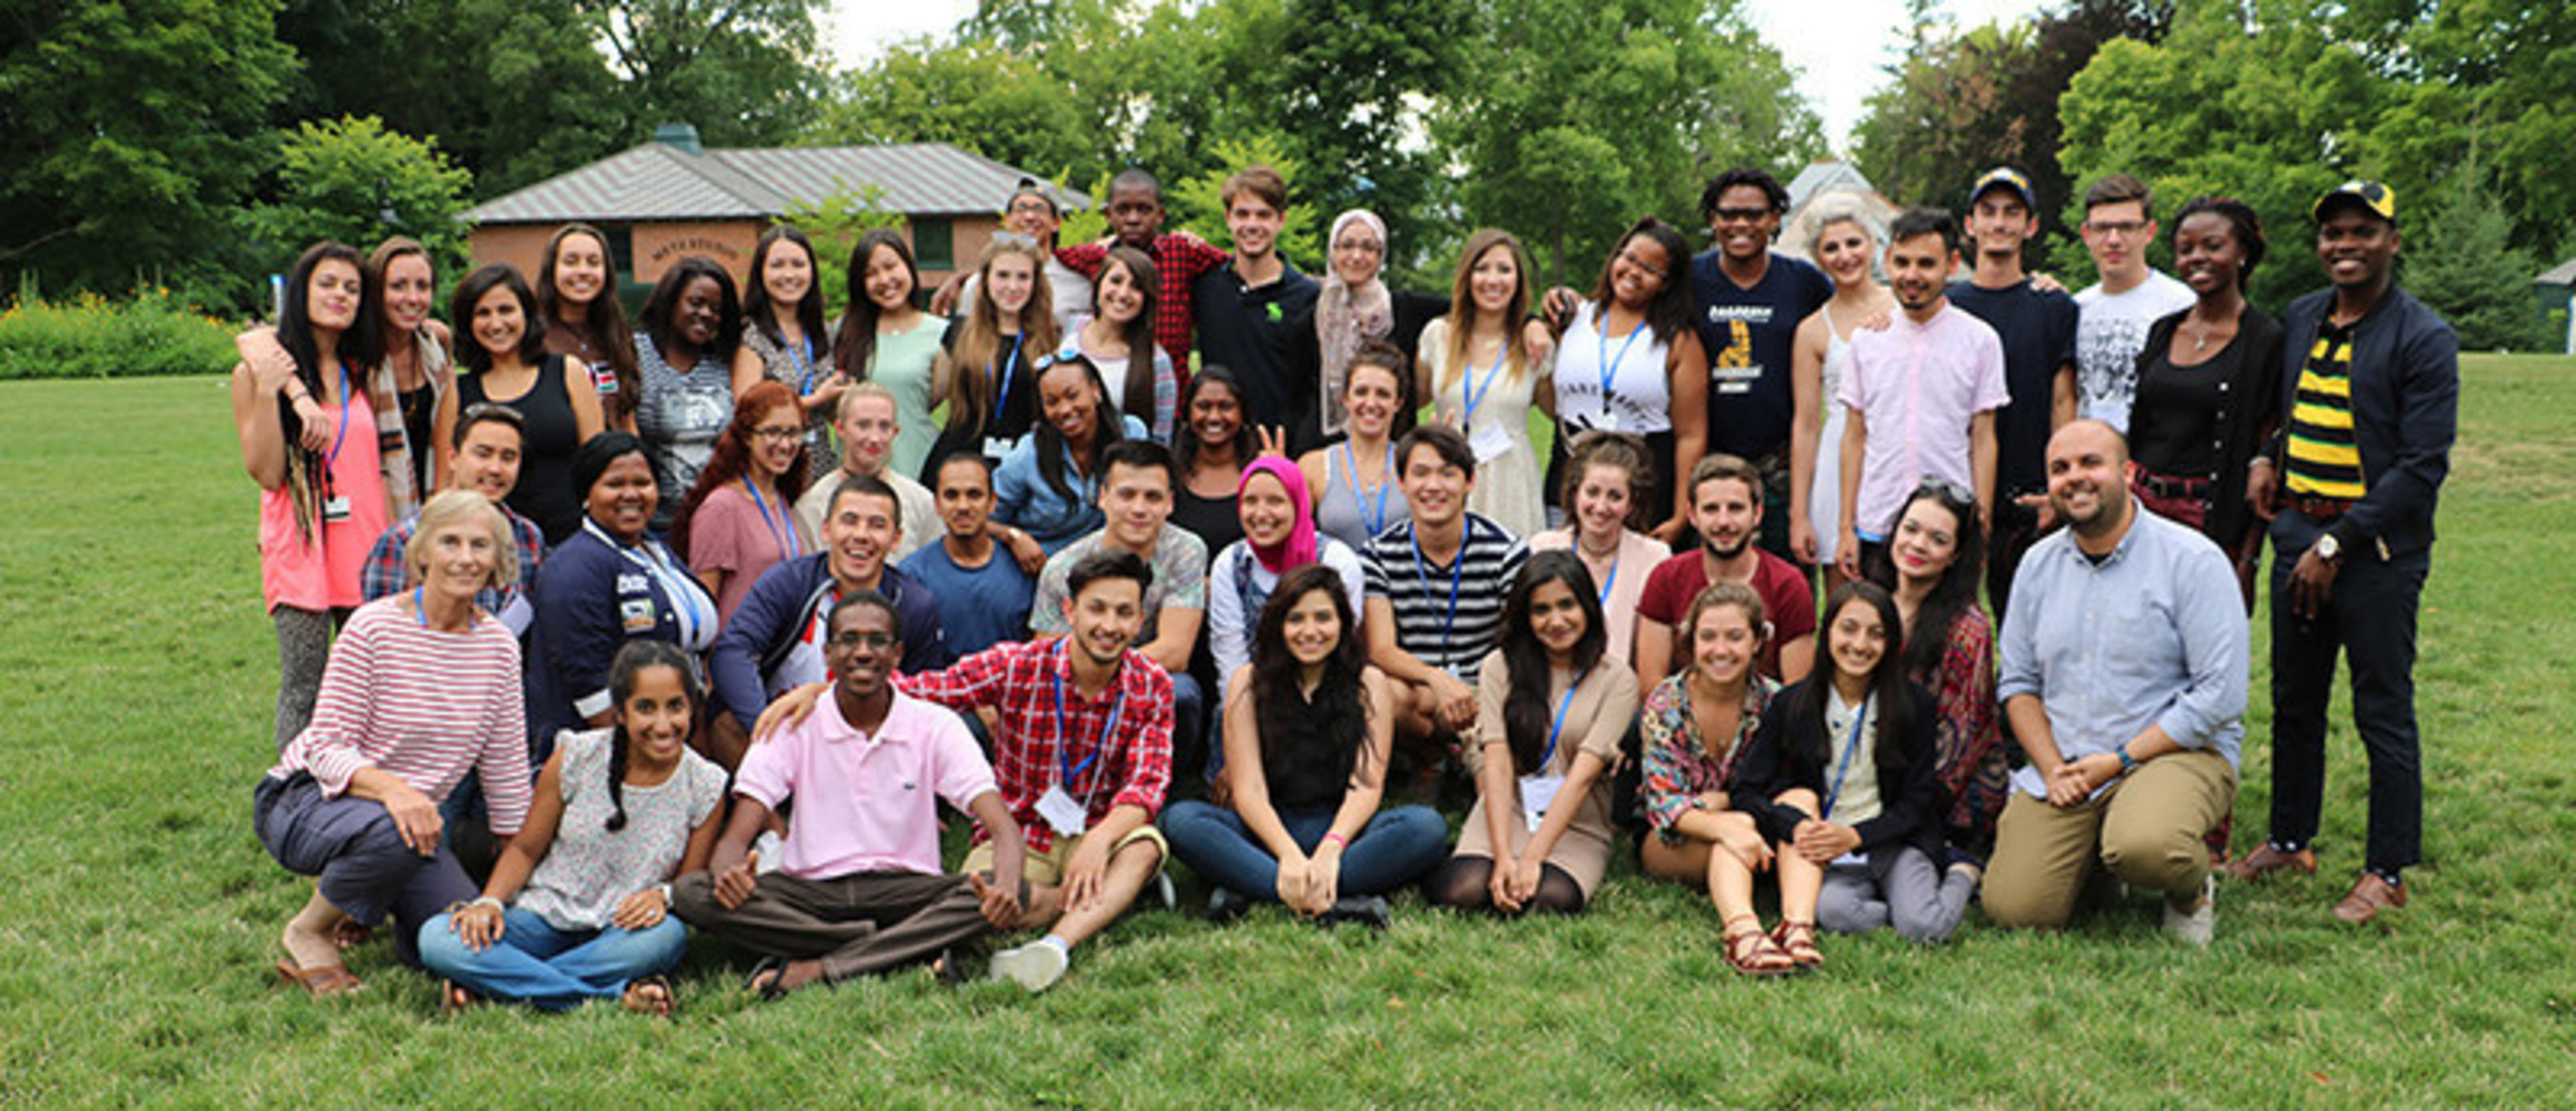 The thirty-nine 2016 Young Leaders Program participants and the MCW team at Champlain College, Burlington, Vermont.